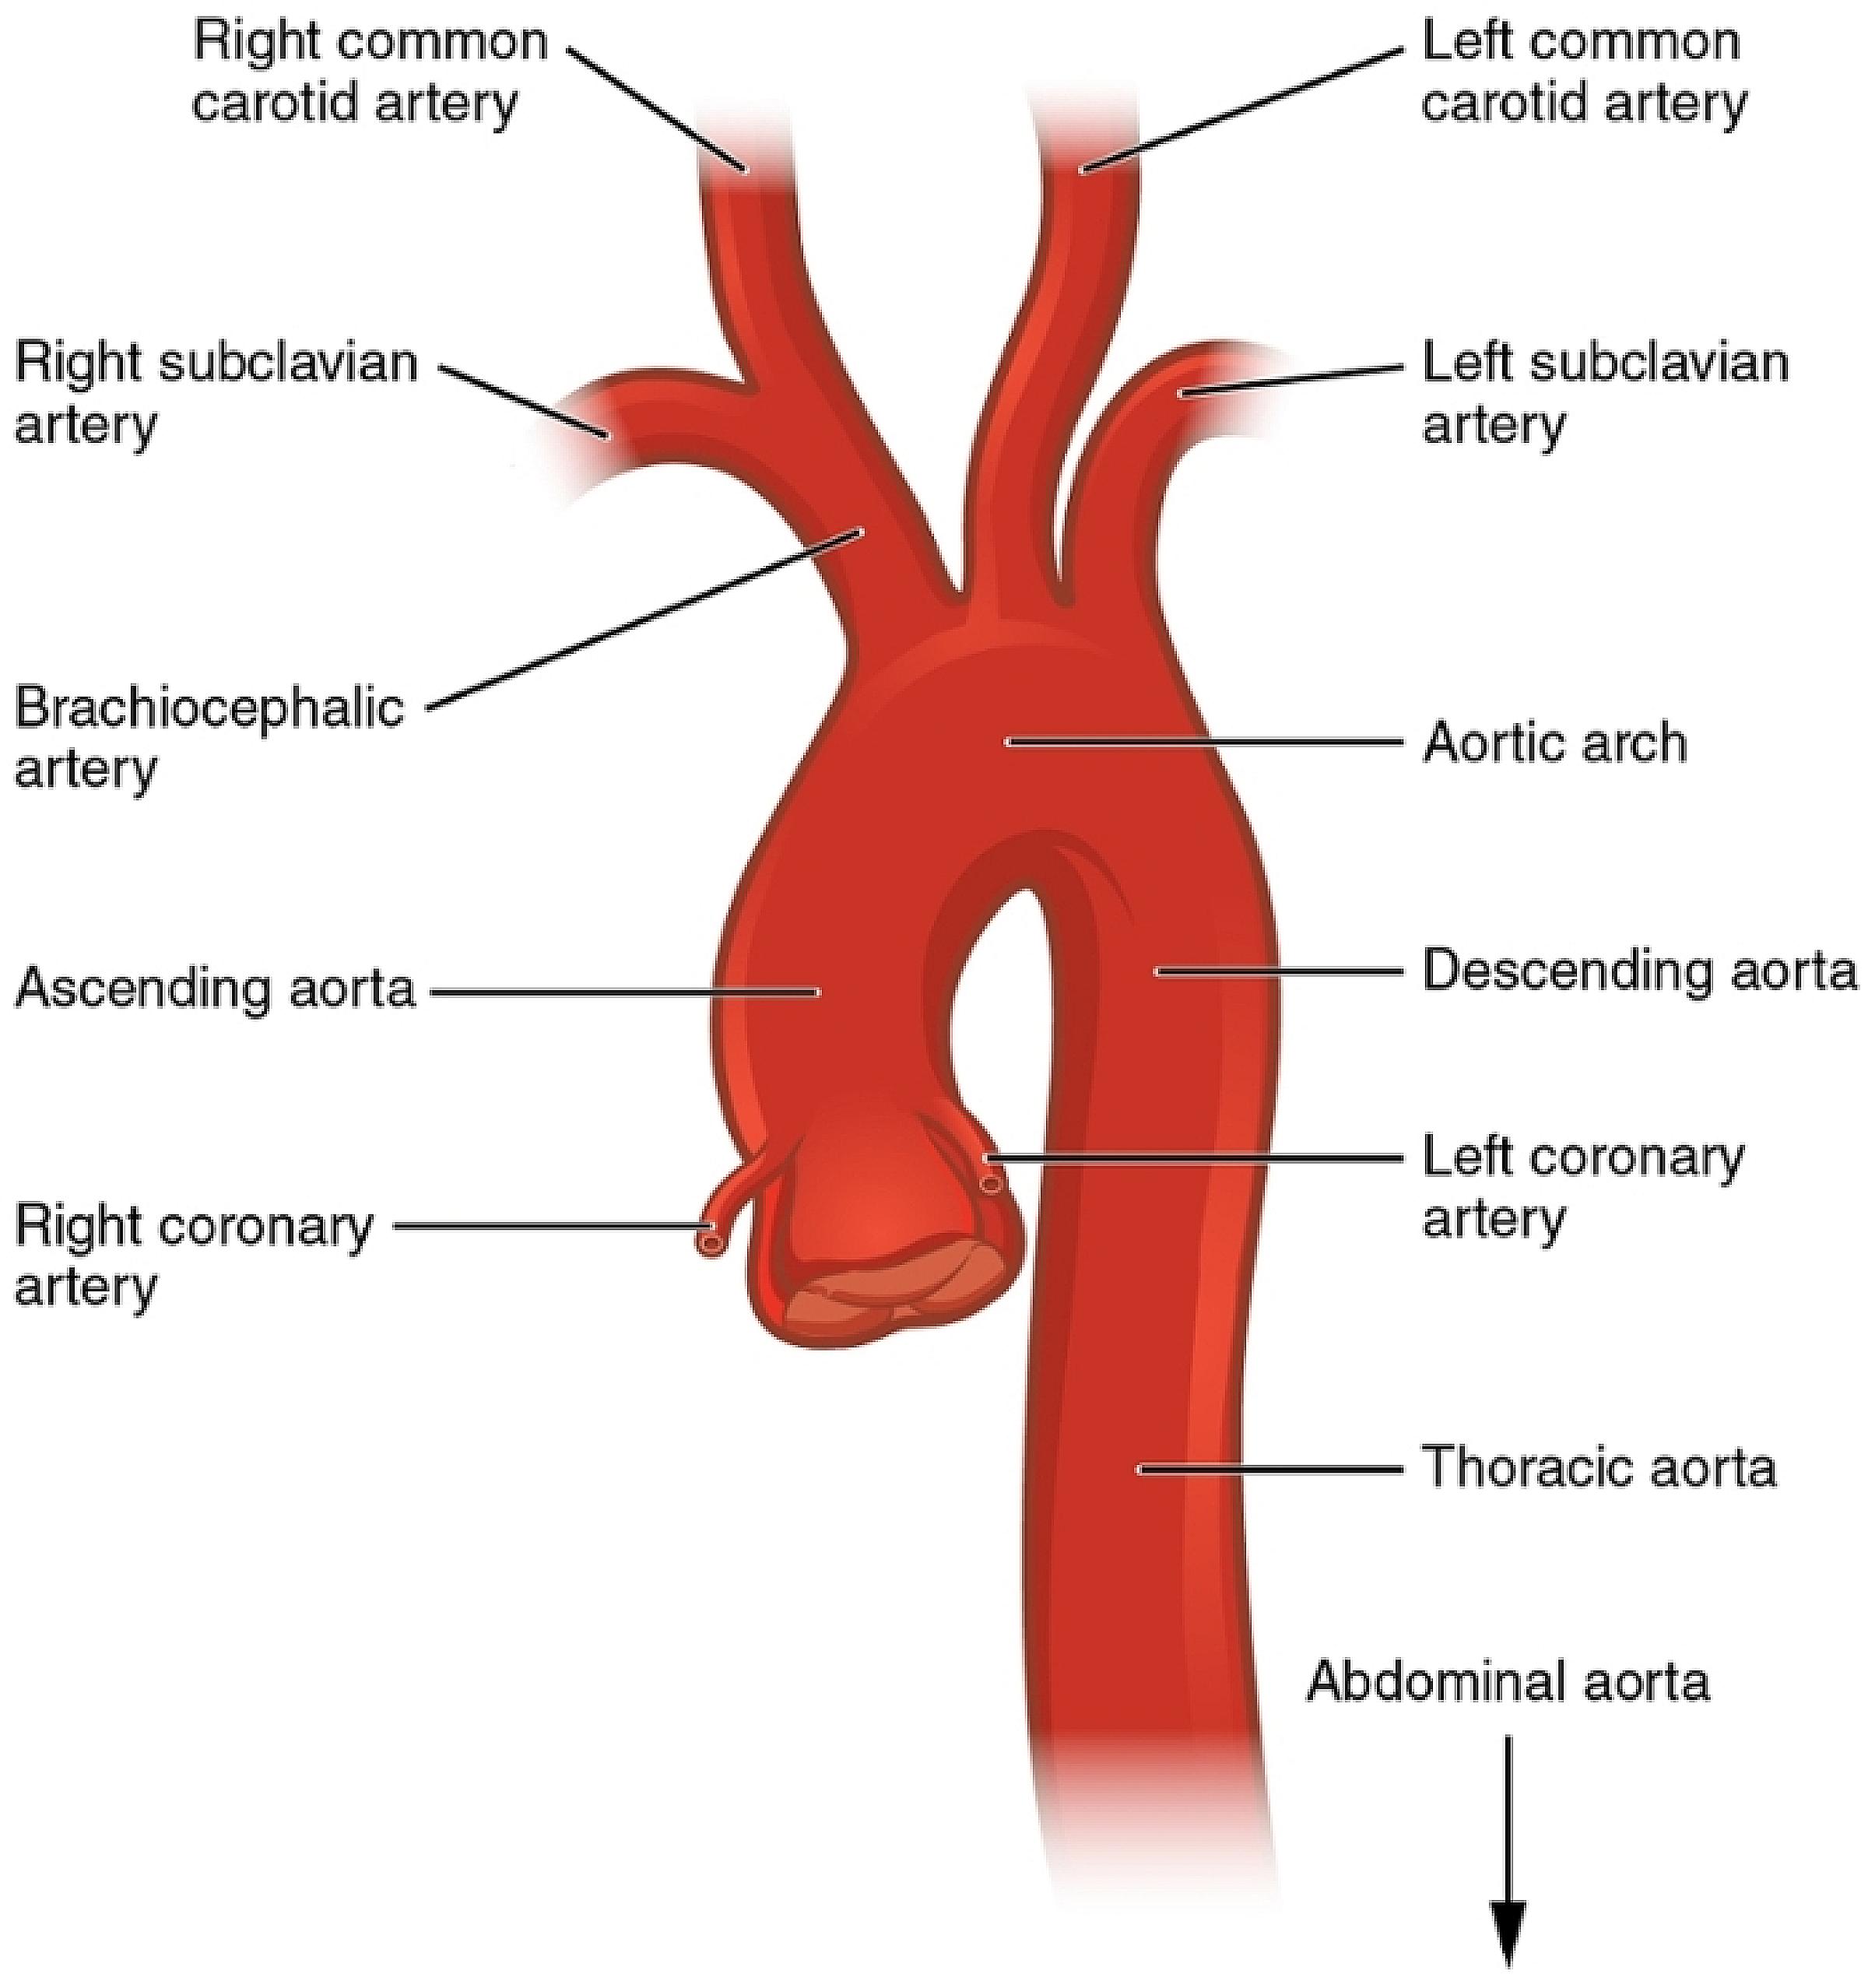 Illustration of right and left carotid arteries